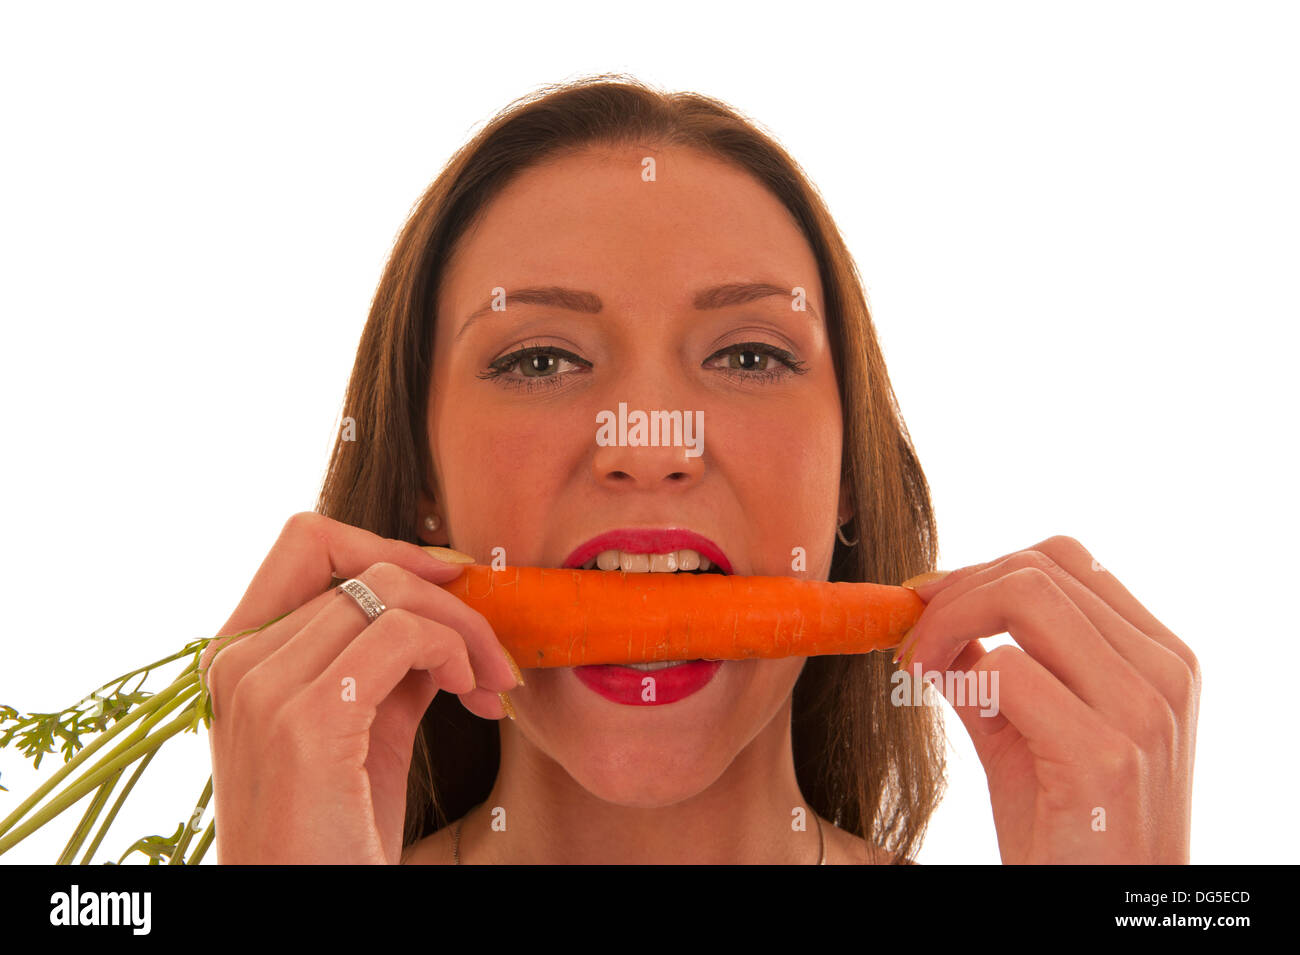 Young girl puts her teeth in an orange carrot Stock Photo